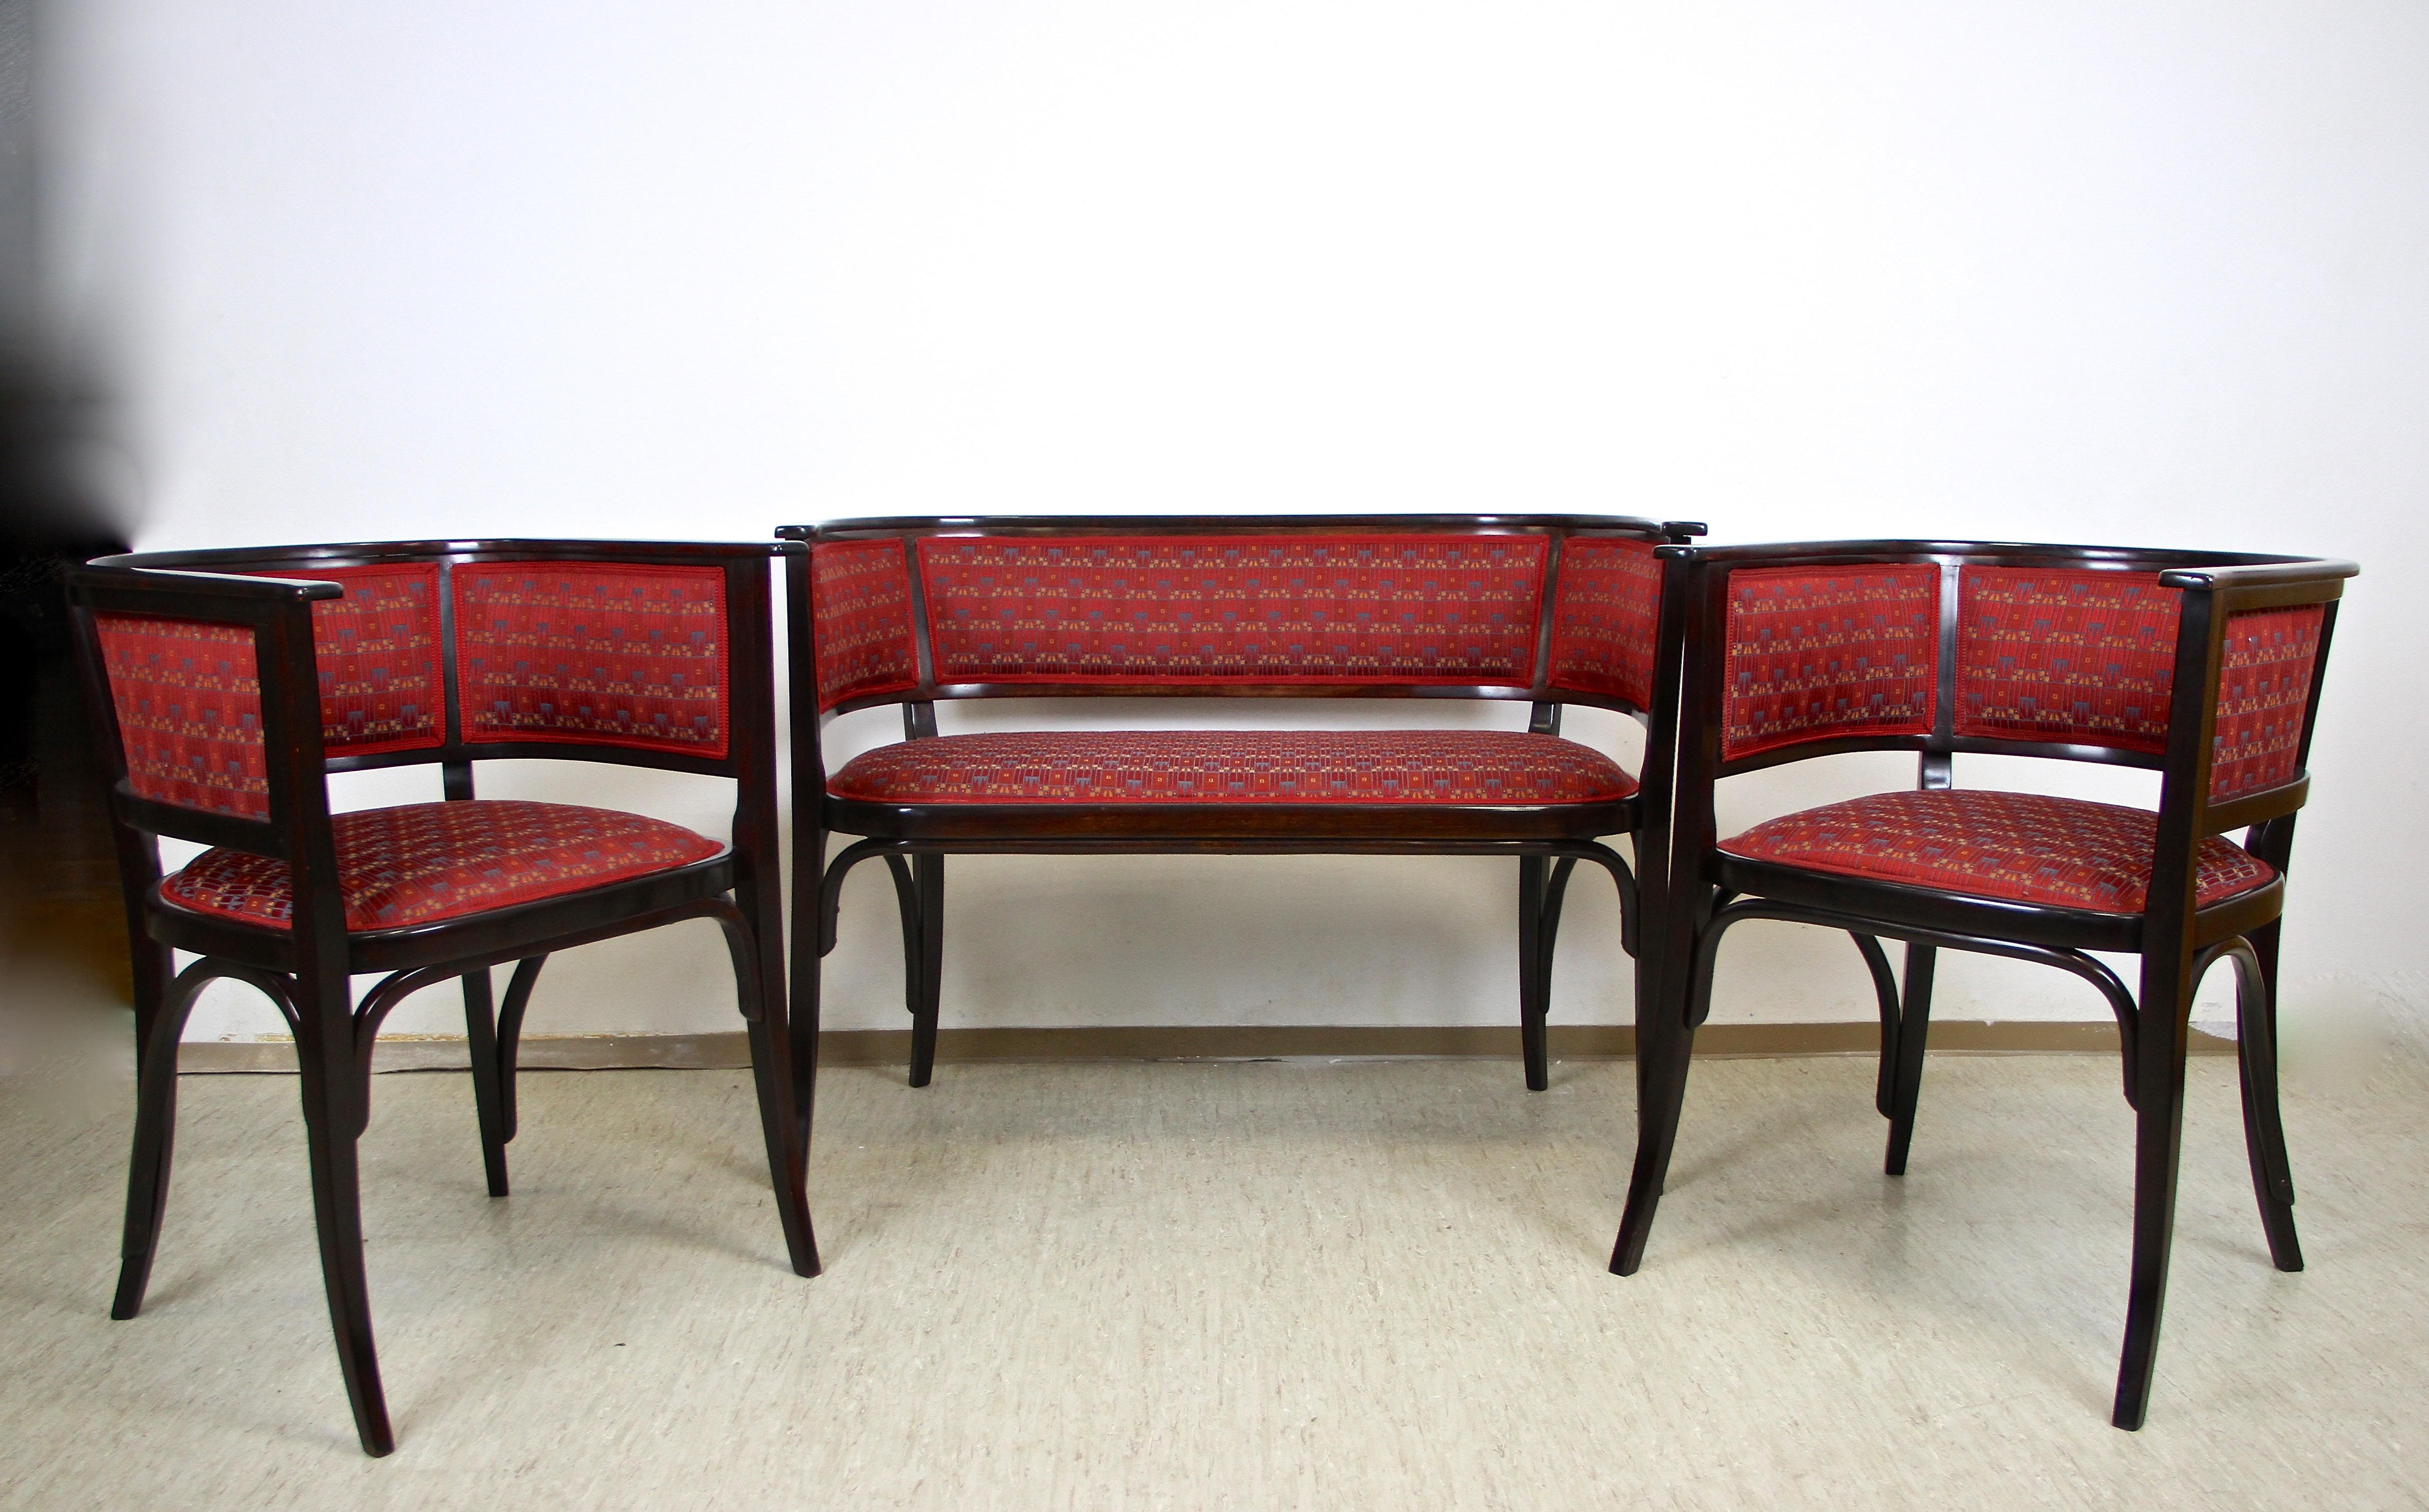 Thonet Bentwood Seating Set with Two Armchairs and Bench, Austria, circa 1910 13